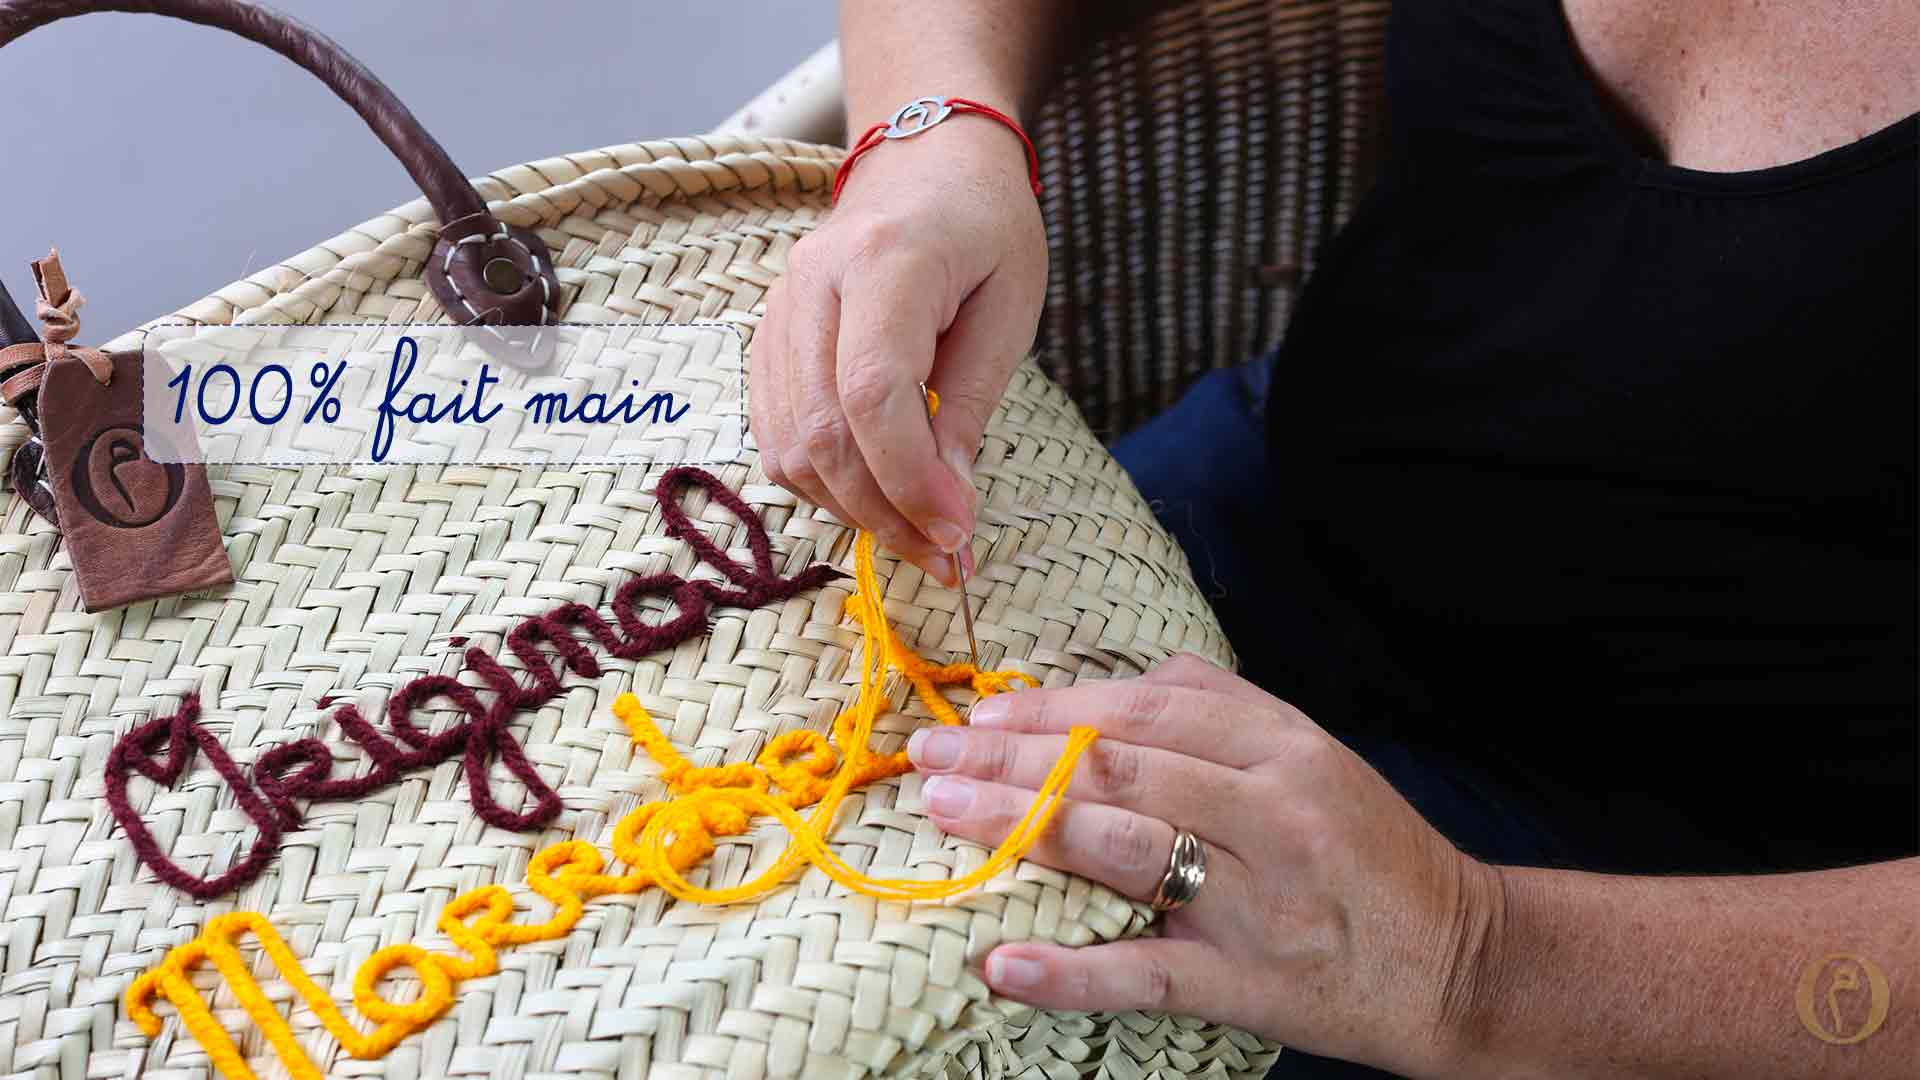 Home-page-broderie-1920x1080-web